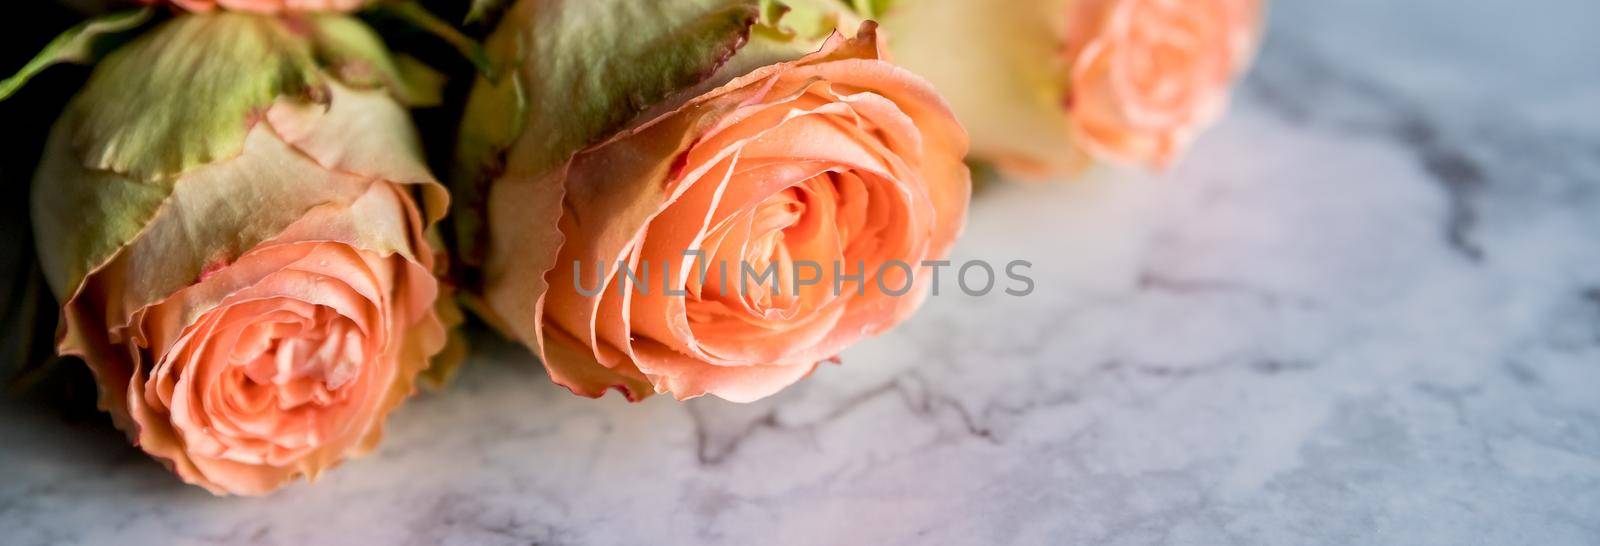 Beautiful english roses flowers. sunshine, Beautiful peony-shaped bushy pink roses. Valentine's day, the concept of love and loyalty.The concept of a flower shop, a small family business by YuliaYaspe1979